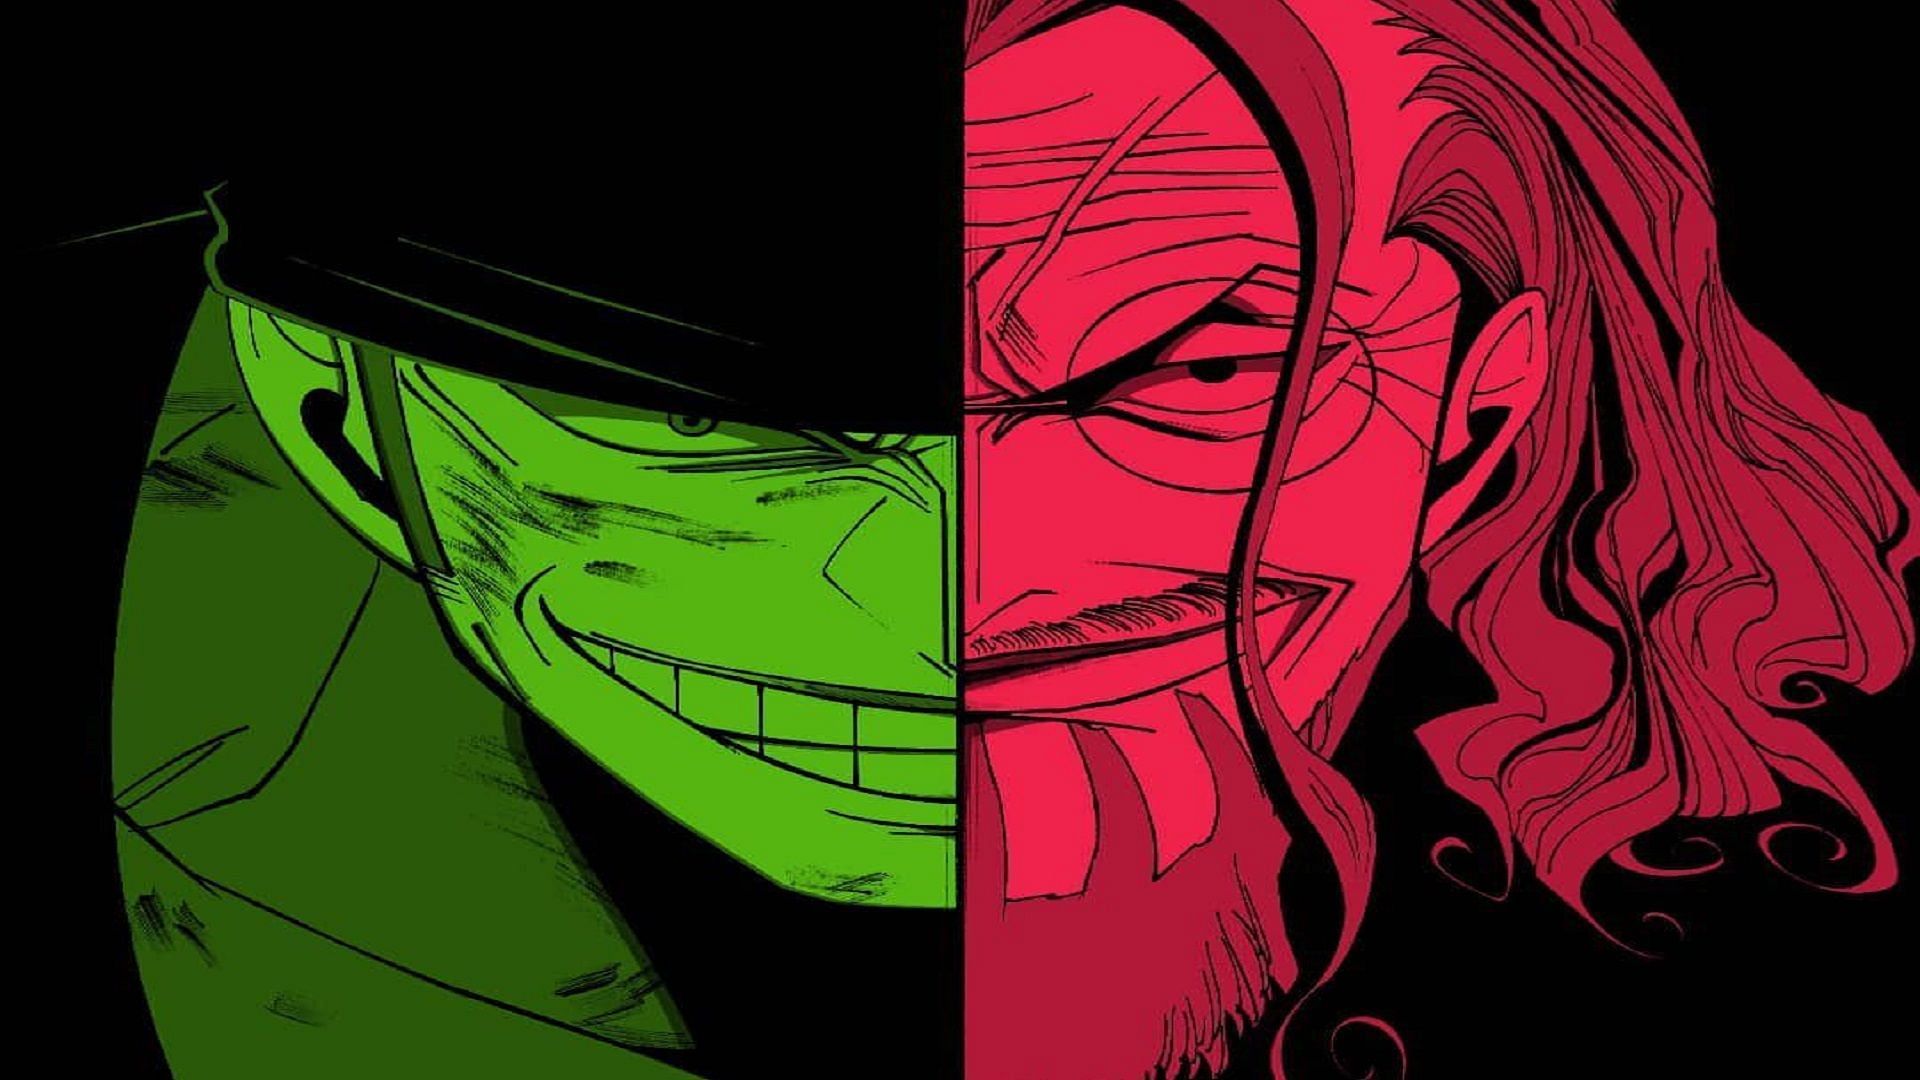 The analogy between &quot;King of Hell&quot; Zoro and &quot;Dark King&quot; Rayleigh emphasizes the parallel between these two characters (Image via Eiichiro Oda/Shueisha, One Piece)